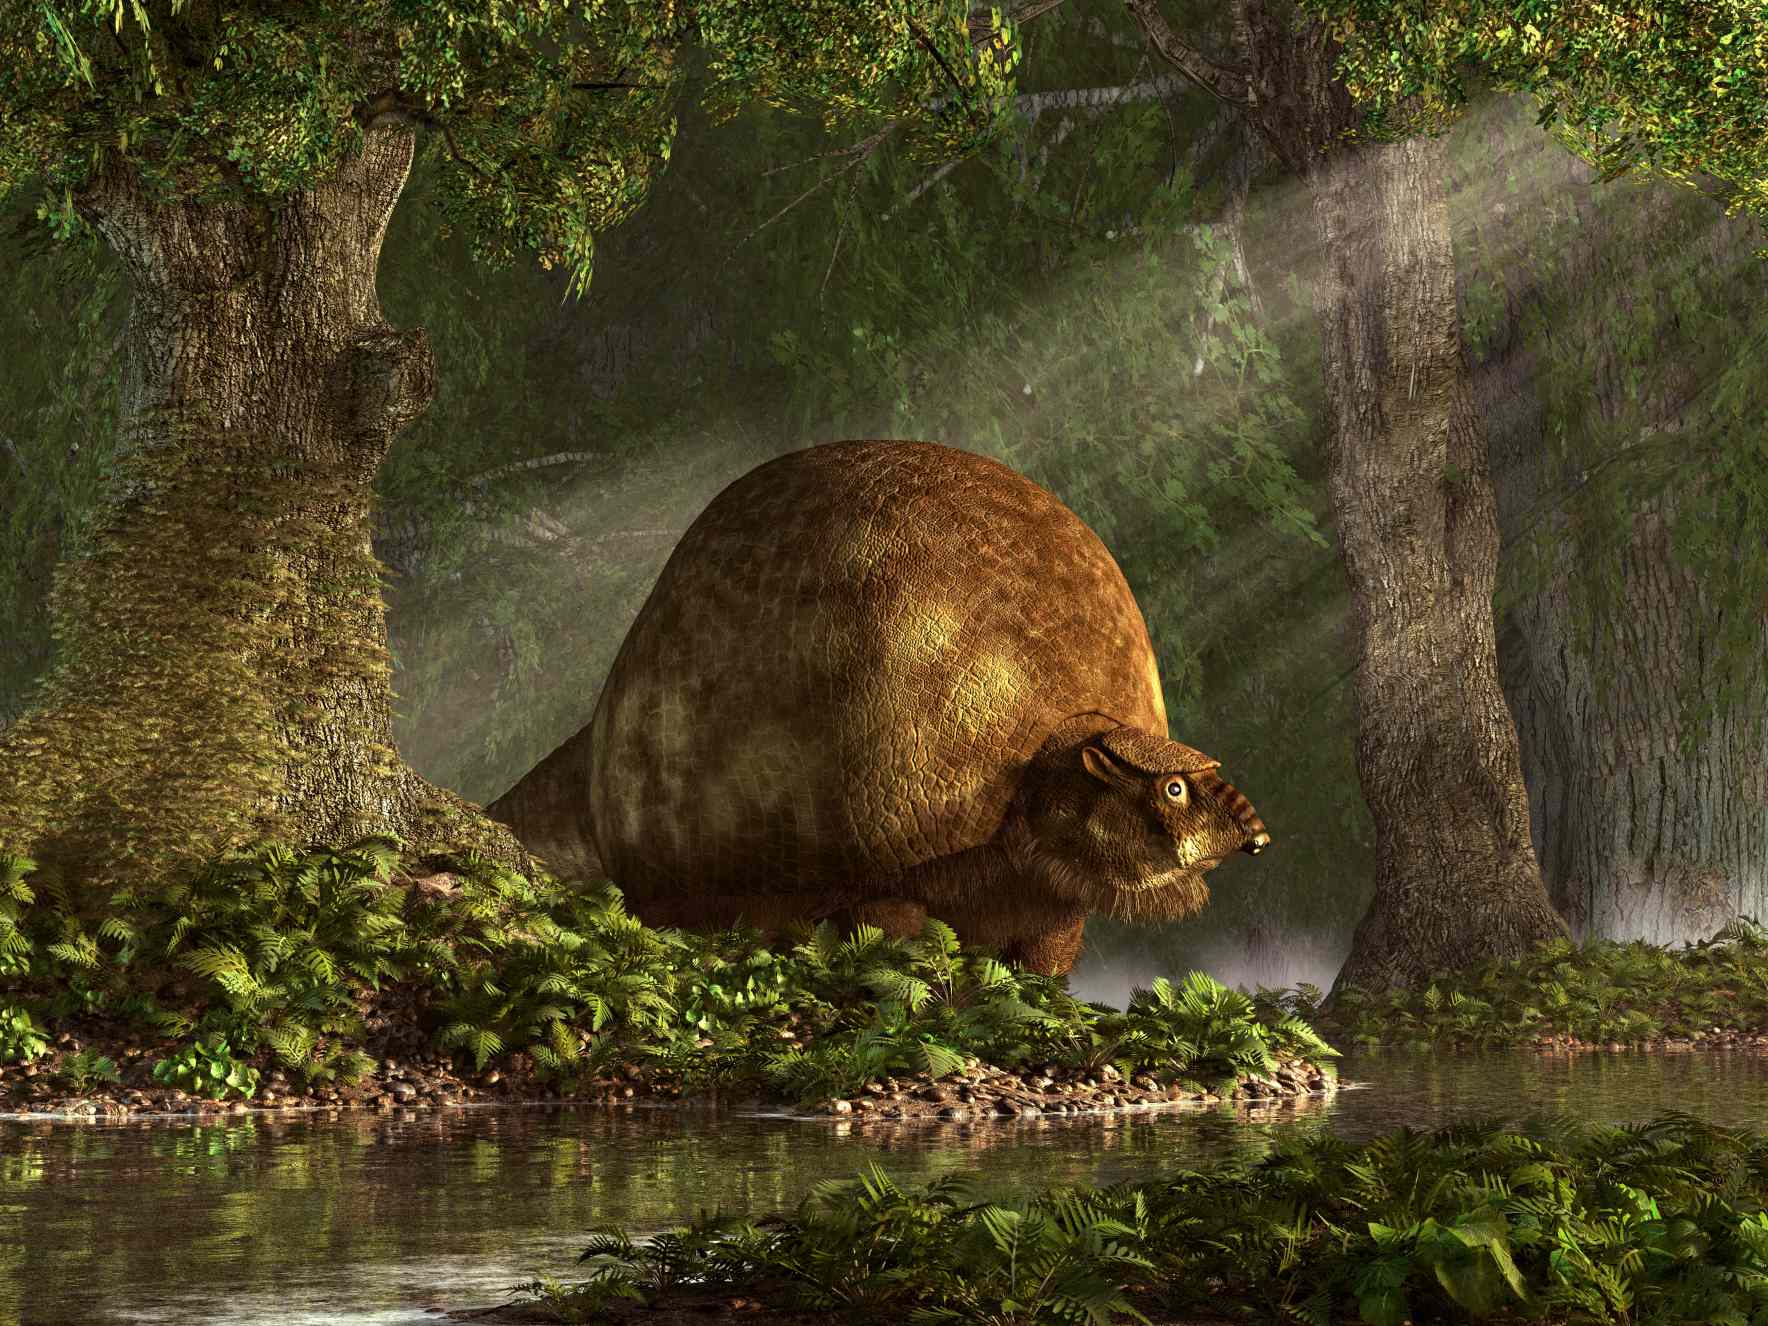 Early American humans used to hunt giant armadillos and live inside their shells 1